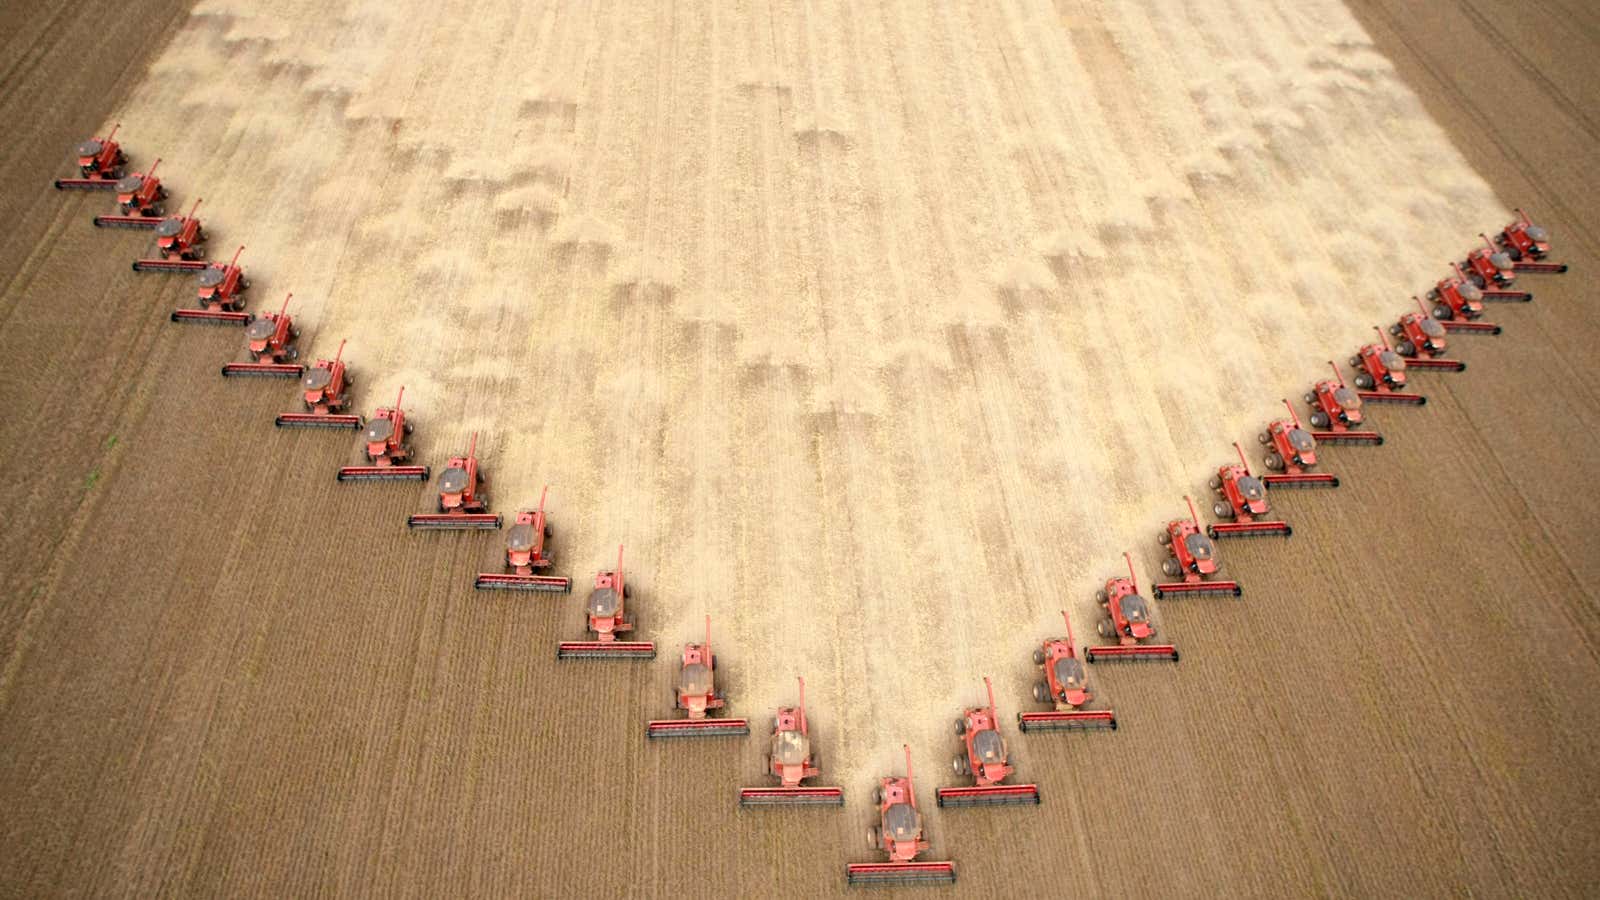 Farming will be saved by robots, not humans.